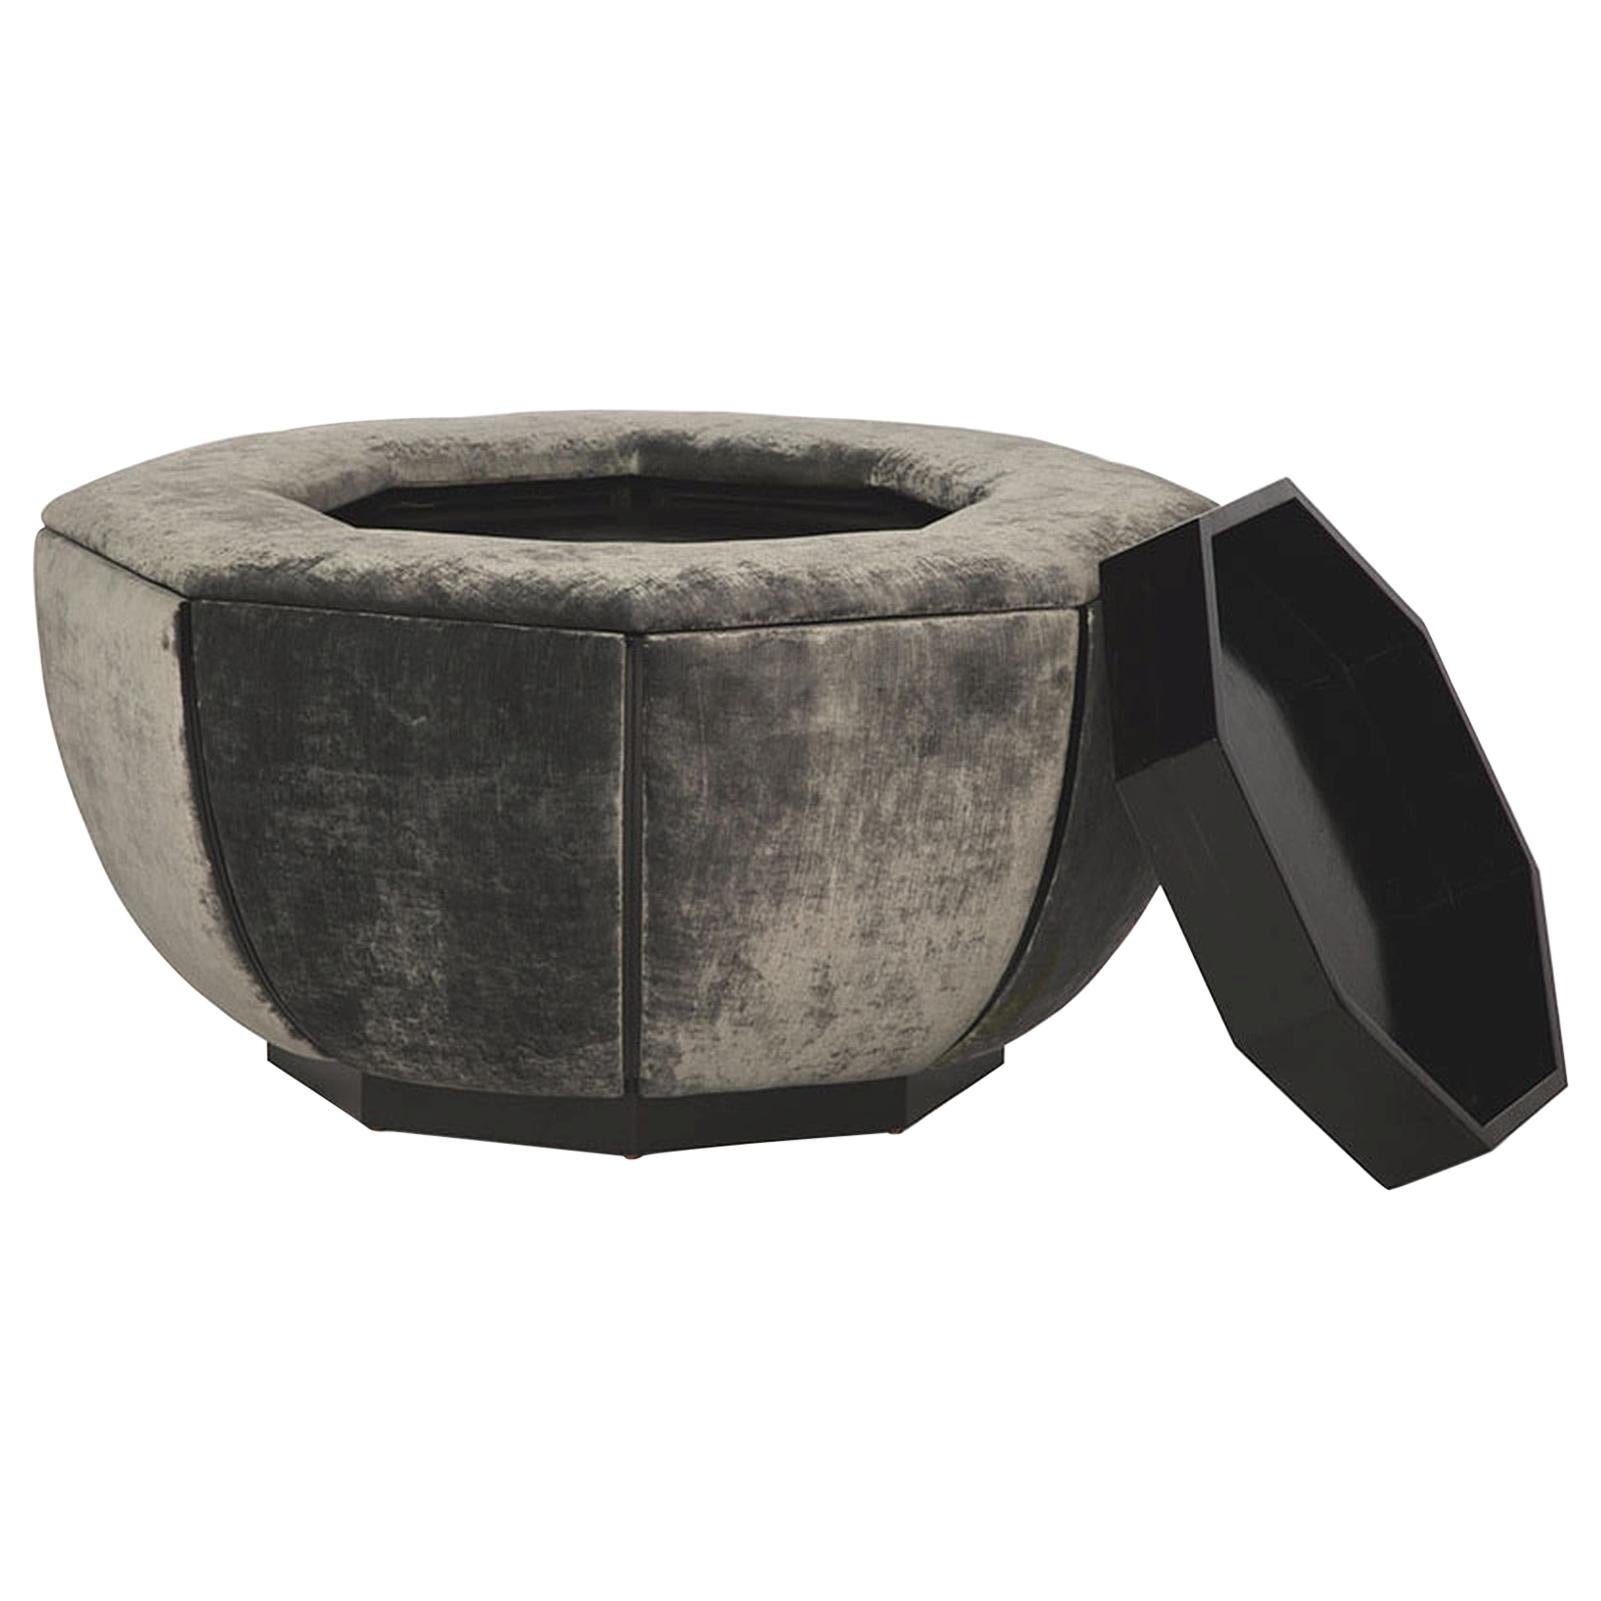 Doheny Coffee Table in Gray with Lacquered Stone Gray Finish For Sale